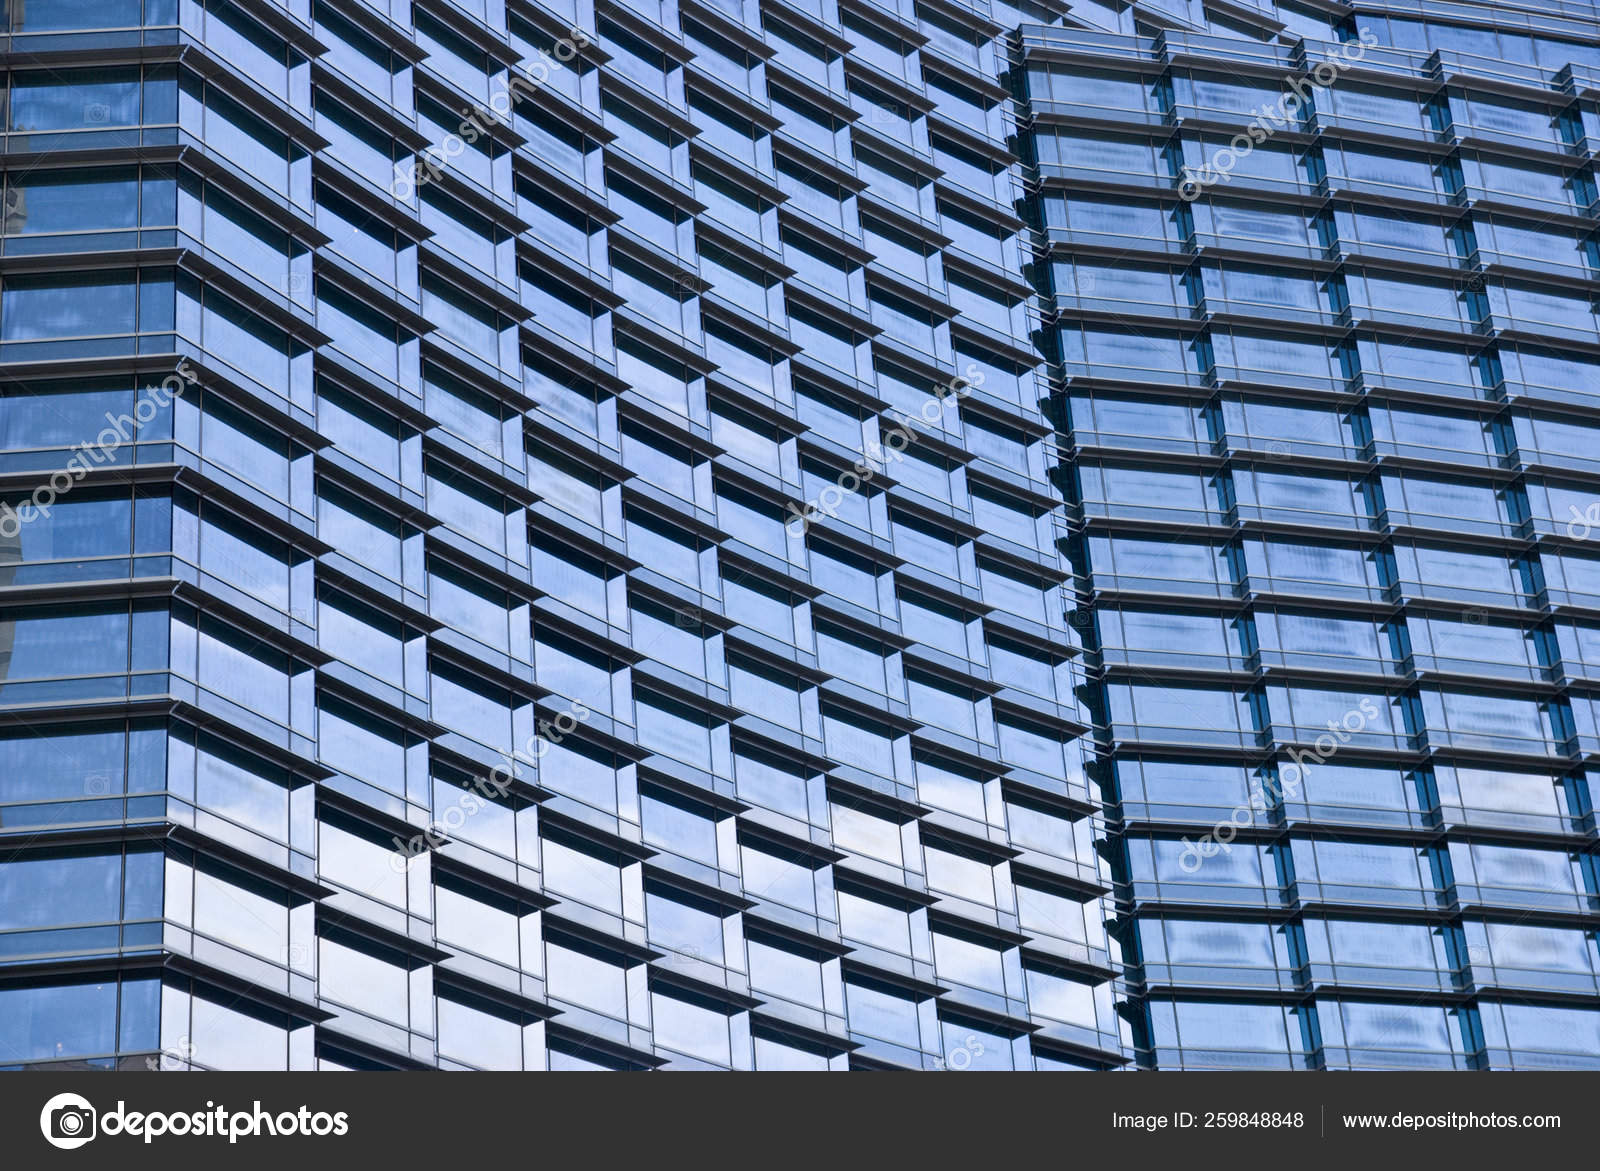 Gleaming facade aria hotel casinos modern architecture new citycenter development stock photo by yayimages